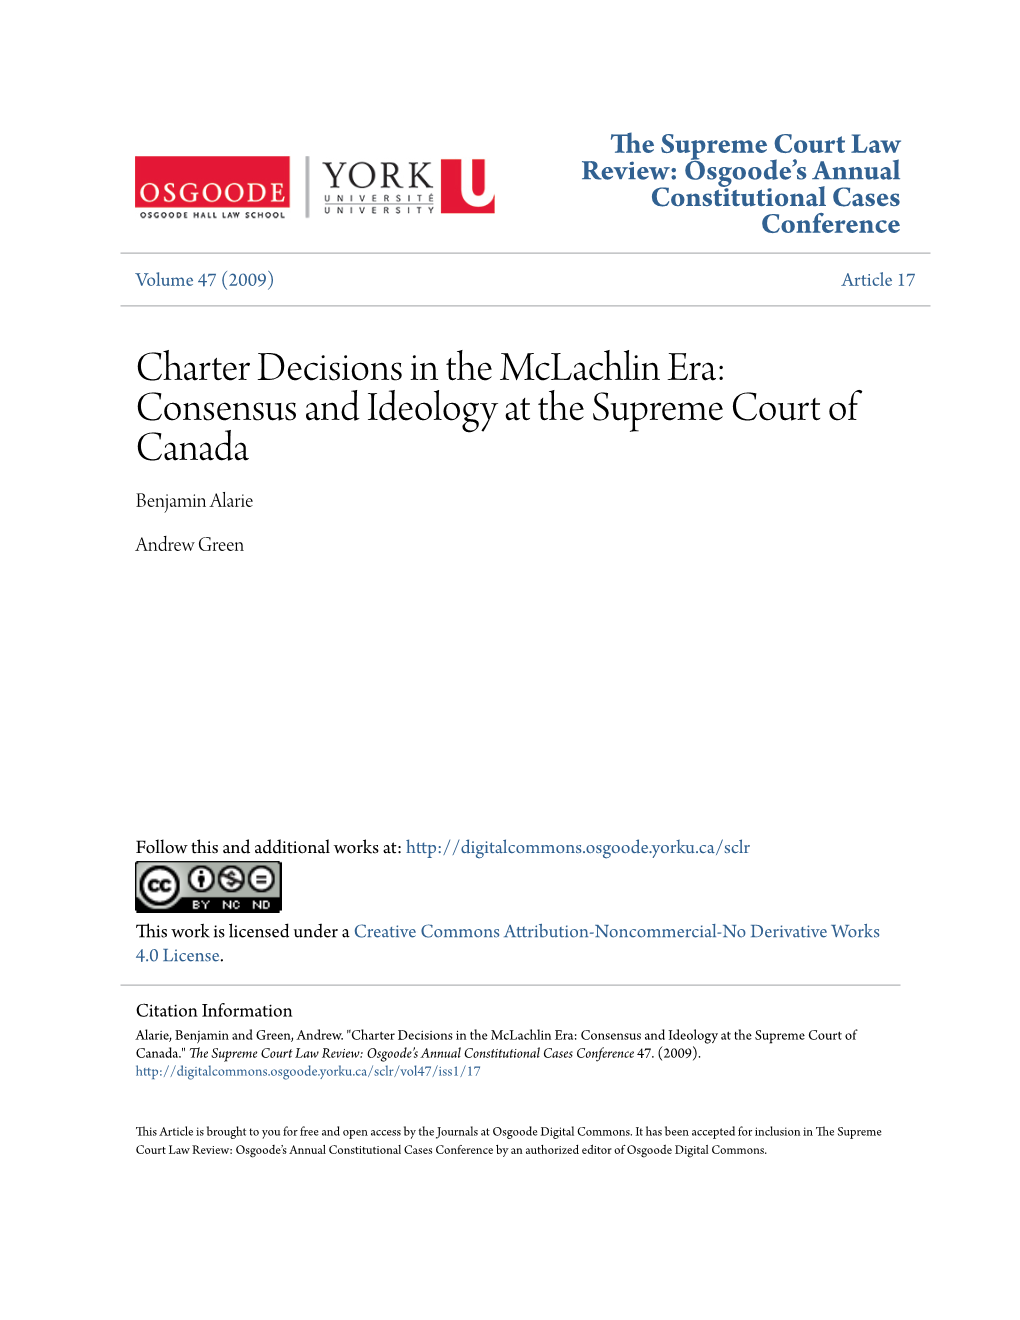 Consensus and Ideology at the Supreme Court of Canada Benjamin Alarie